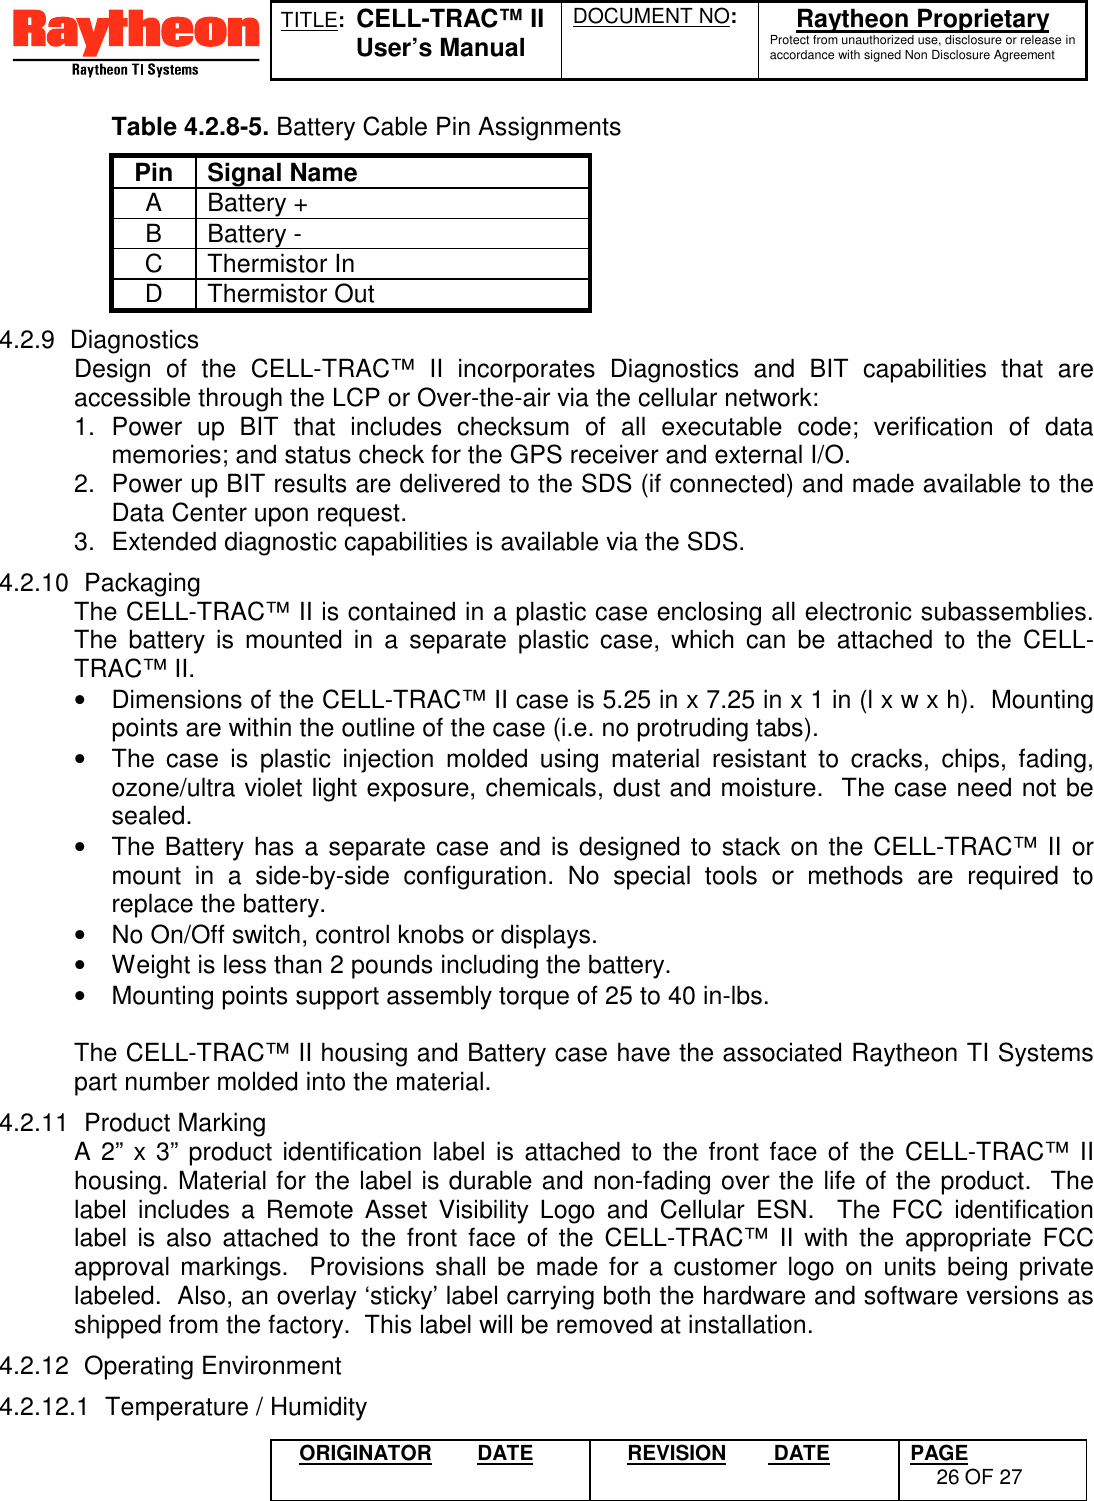 TITLE:  CELL-TRAC™ IIUser’s ManualDOCUMENT NO: Raytheon ProprietaryProtect from unauthorized use, disclosure or release inaccordance with signed Non Disclosure AgreementORIGINATOR DATE REVISION  DATE PAGE26 OF 27Table 4.2.8-5. Battery Cable Pin AssignmentsPin Signal NameA Battery +B Battery -C Thermistor InD Thermistor Out4.2.9 DiagnosticsDesign of the CELL-TRAC™ II incorporates Diagnostics and BIT capabilities that areaccessible through the LCP or Over-the-air via the cellular network:1. Power up BIT that includes checksum of all executable code; verification of datamemories; and status check for the GPS receiver and external I/O.2.  Power up BIT results are delivered to the SDS (if connected) and made available to theData Center upon request.3.  Extended diagnostic capabilities is available via the SDS.4.2.10 PackagingThe CELL-TRAC™ II is contained in a plastic case enclosing all electronic subassemblies.The battery is mounted in a separate plastic case, which can be attached to the CELL-TRAC™ II.•  Dimensions of the CELL-TRAC™ II case is 5.25 in x 7.25 in x 1 in (l x w x h).  Mountingpoints are within the outline of the case (i.e. no protruding tabs).•  The case is plastic injection molded using material resistant to cracks, chips, fading,ozone/ultra violet light exposure, chemicals, dust and moisture.  The case need not besealed.•  The Battery has a separate case and is designed to stack on the CELL-TRAC™ II ormount in a side-by-side configuration. No special tools or methods are required toreplace the battery.•  No On/Off switch, control knobs or displays.•  Weight is less than 2 pounds including the battery.•  Mounting points support assembly torque of 25 to 40 in-lbs.The CELL-TRAC™ II housing and Battery case have the associated Raytheon TI Systemspart number molded into the material.4.2.11 Product MarkingA 2” x 3” product identification label is attached to the front face of the CELL-TRAC™ IIhousing. Material for the label is durable and non-fading over the life of the product.  Thelabel includes a Remote Asset Visibility Logo and Cellular ESN.  The FCC identificationlabel is also attached to the front face of the CELL-TRAC™ II with the appropriate FCCapproval markings.  Provisions shall be made for a customer logo on units being privatelabeled.  Also, an overlay ‘sticky’ label carrying both the hardware and software versions asshipped from the factory.  This label will be removed at installation.4.2.12 Operating Environment4.2.12.1  Temperature / Humidity